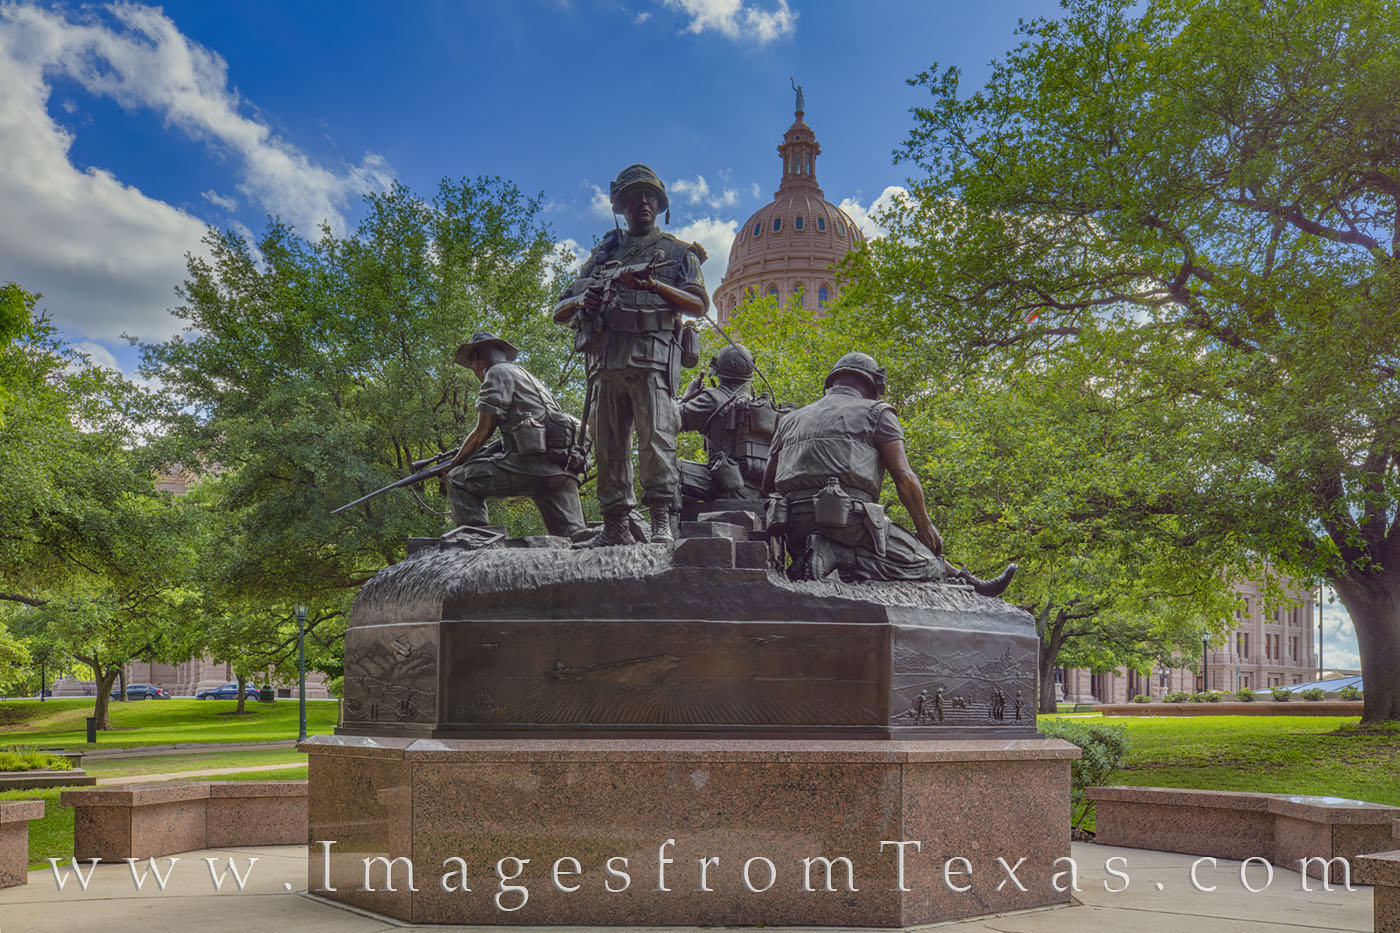 Dedicated to the 3,417 Texas men and women who served and died during the Vietnam War from 1964-1973, the Vietnam Veterans Monument...